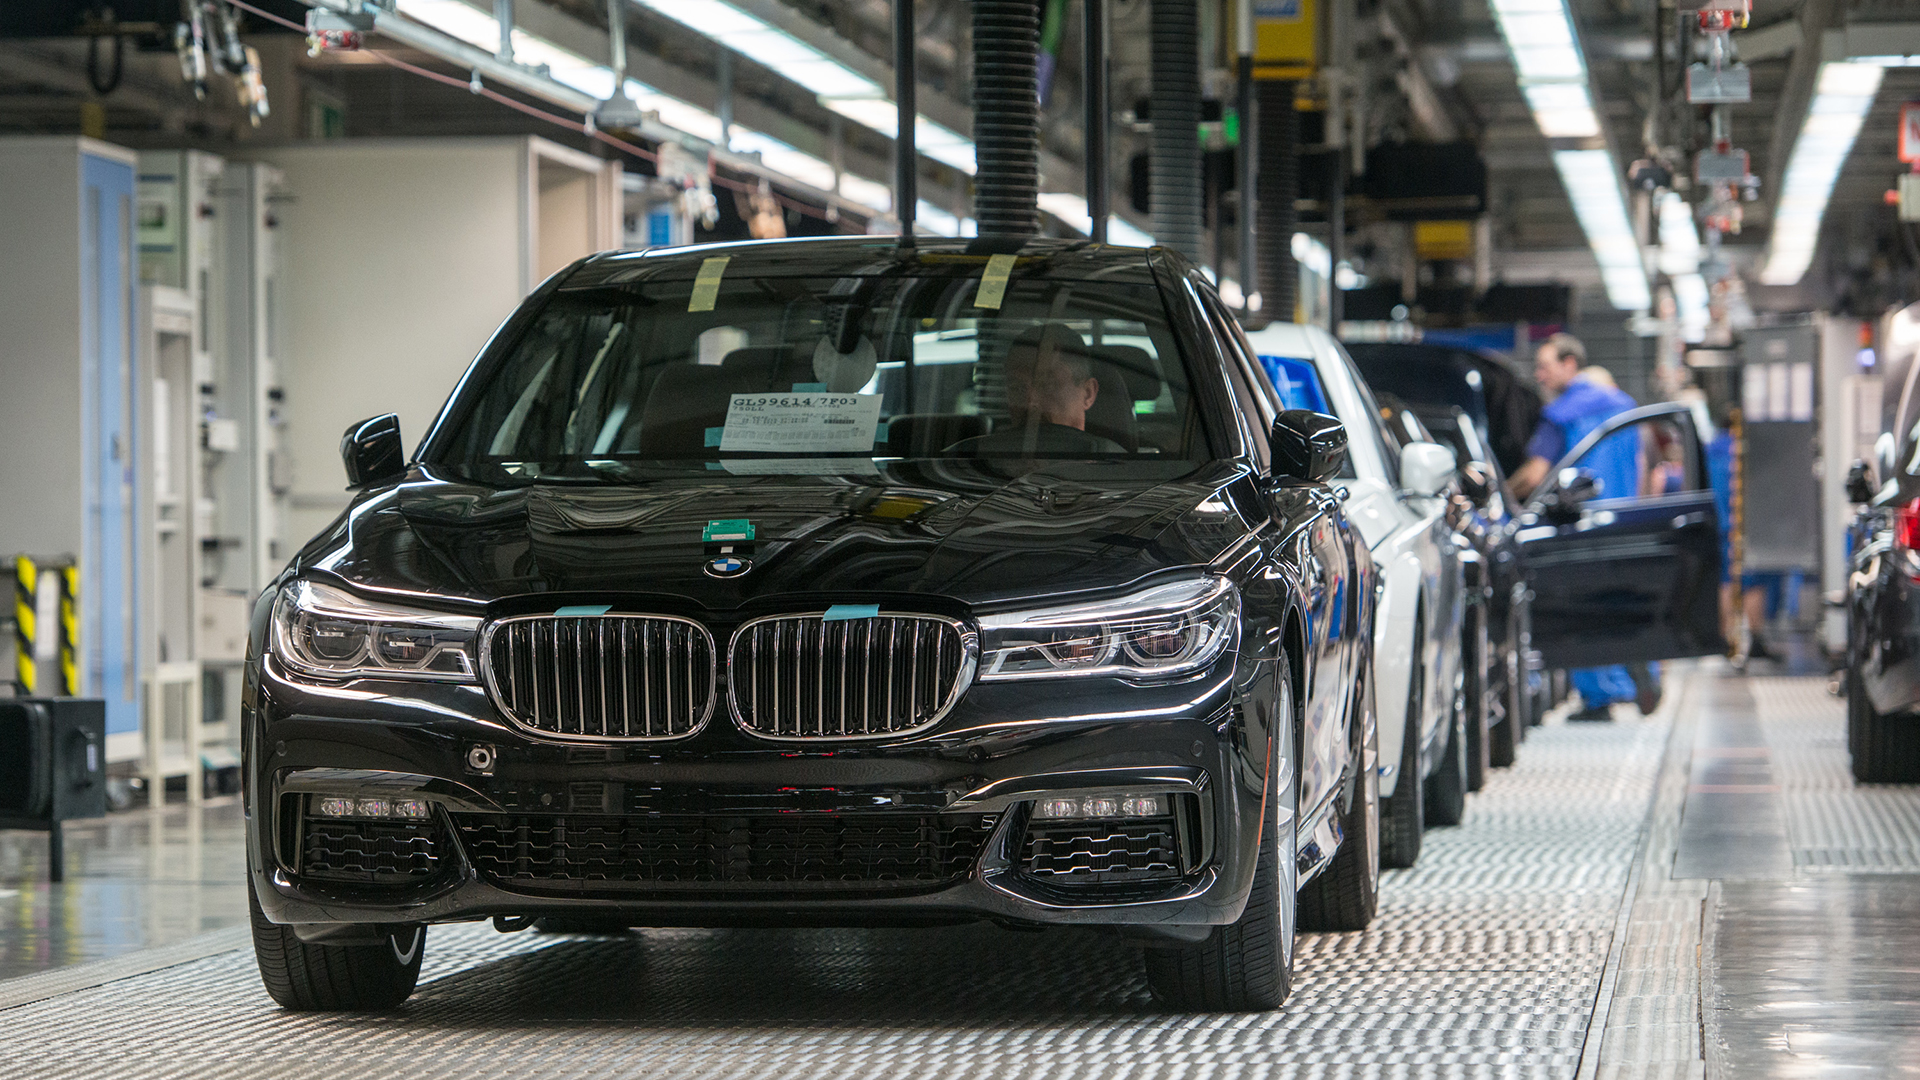 BMW-Produktion in Dingolfing | picture alliance / dpa